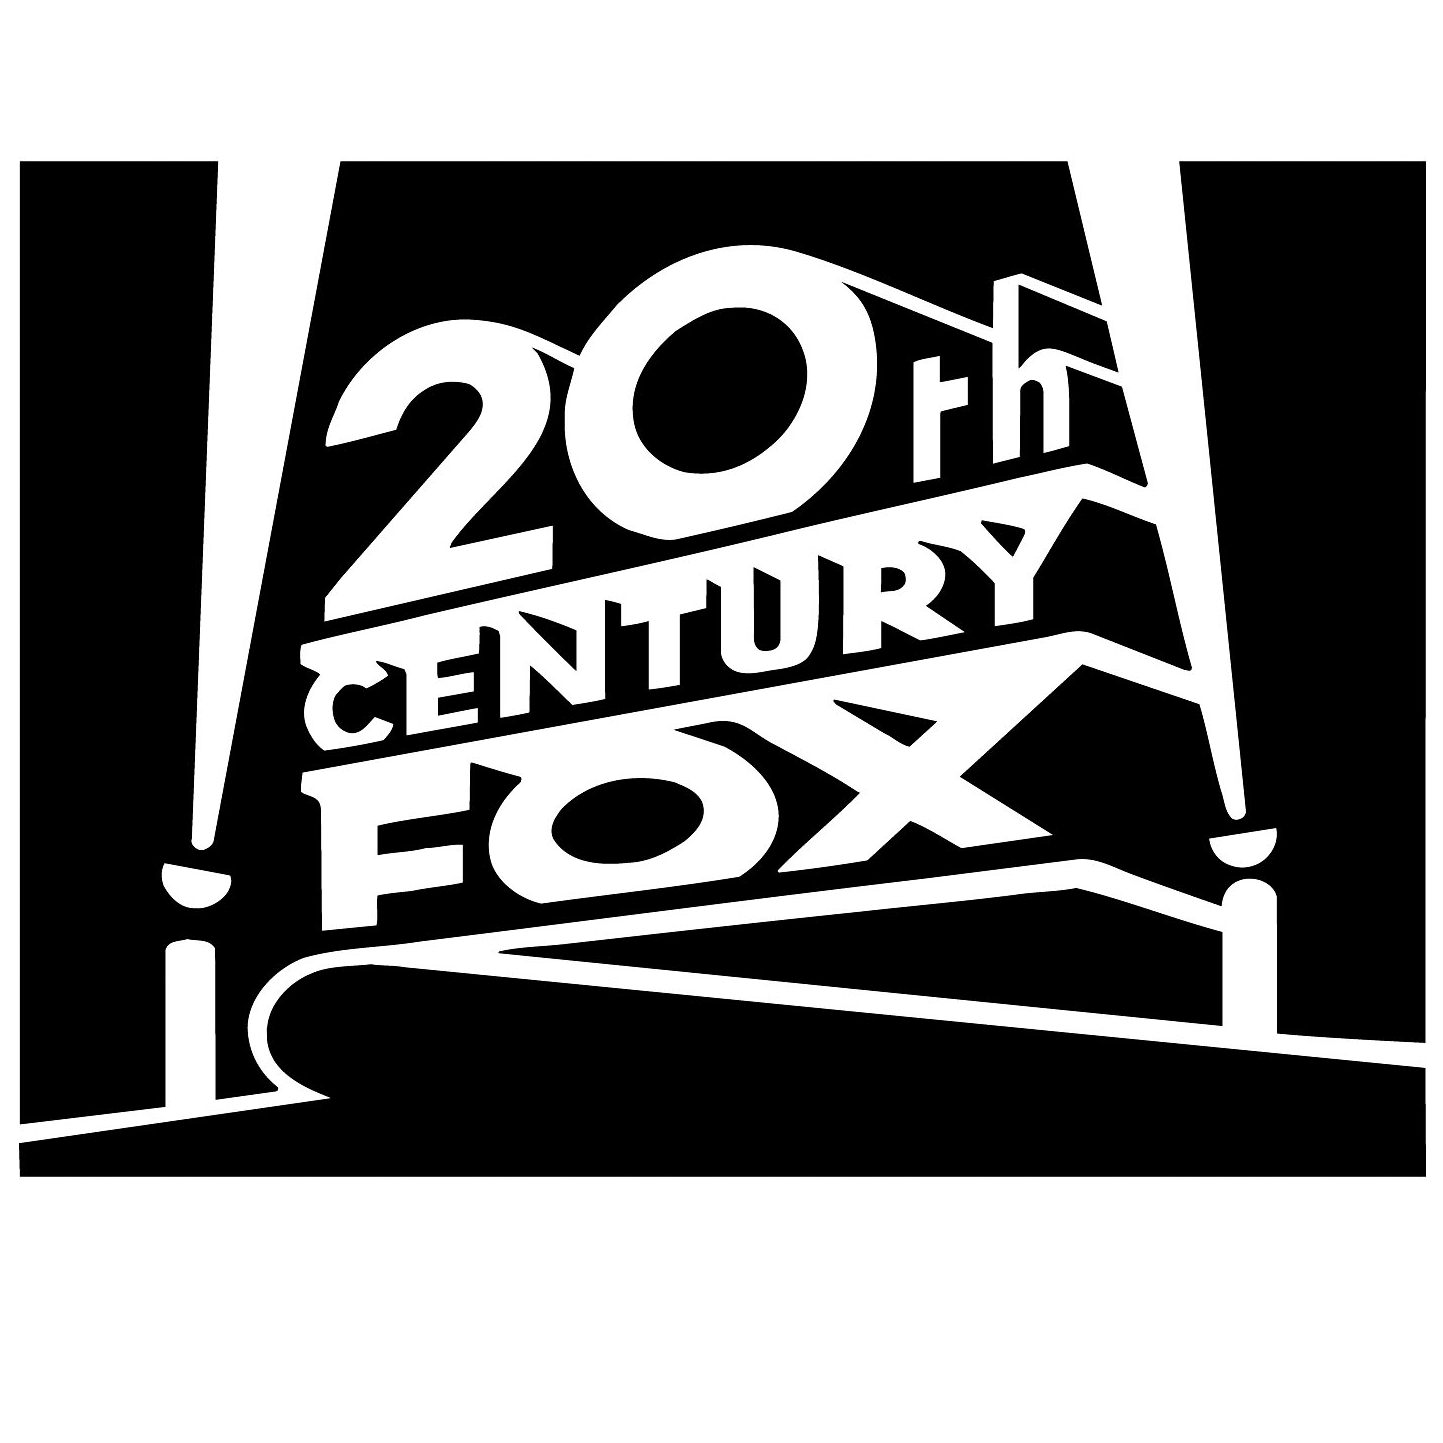 20th-century-fox-logo-black-and-white.png